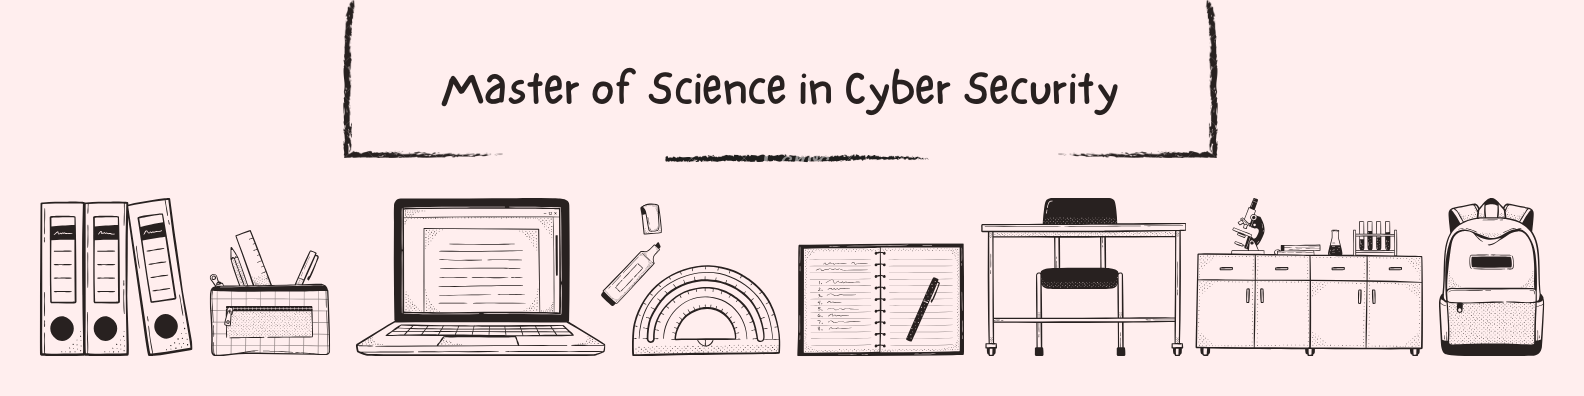 Securing the Future Master of Science in Cyber Security-min